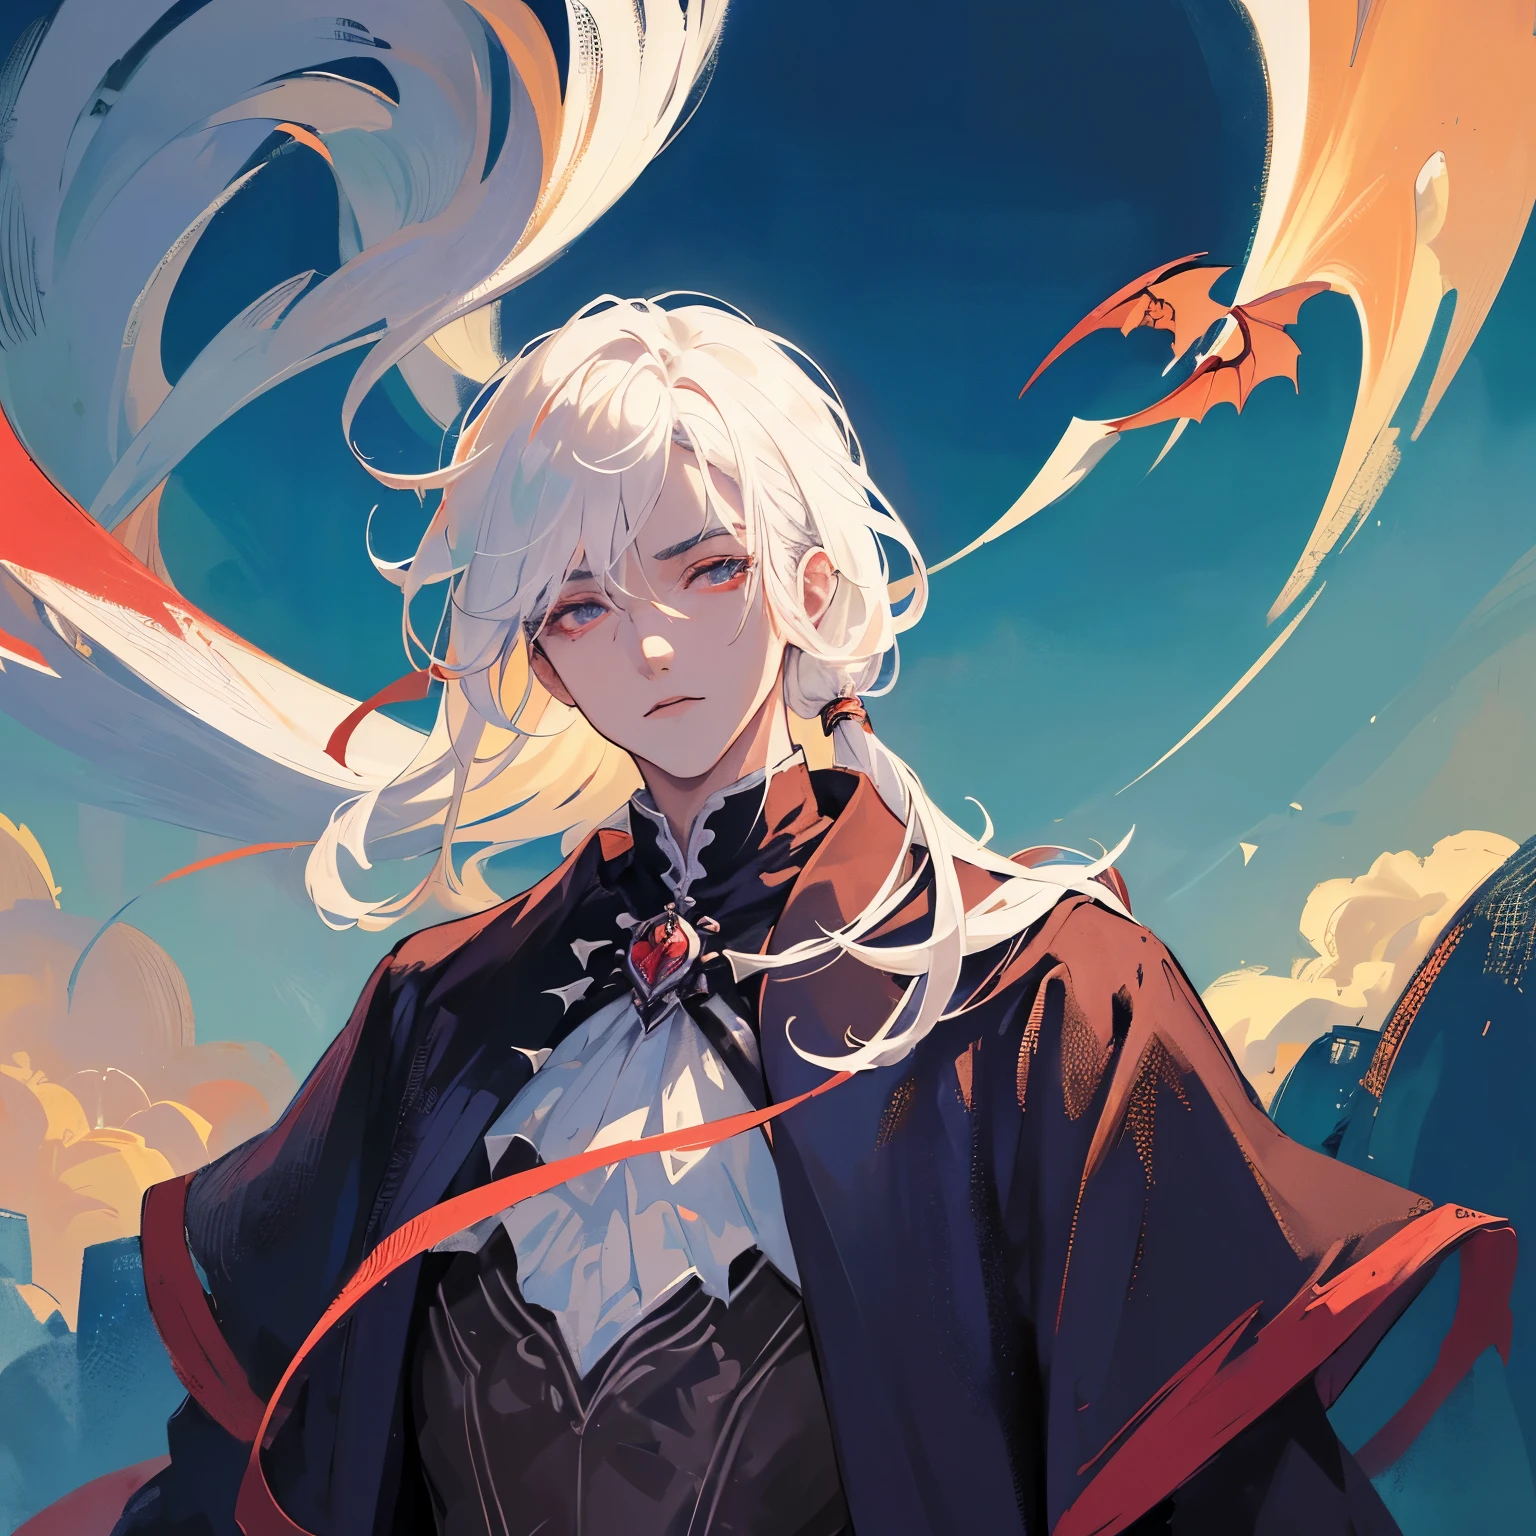 (curse of strahd), (anime), (full body), (front), (Masterpiece), (Portrait), (Aesthetic), (Whole Crpo), (White Hair), (High Quality), (Aesthetic Clothes), (Professional Angle), (Rule of Thirds), (Male), (Man), (Male), (Handsome), (Male Features), (21 Years Old), (Attractive Vampire), Summer, (Ink Mist), (Afternoon), (Vibrant Light)